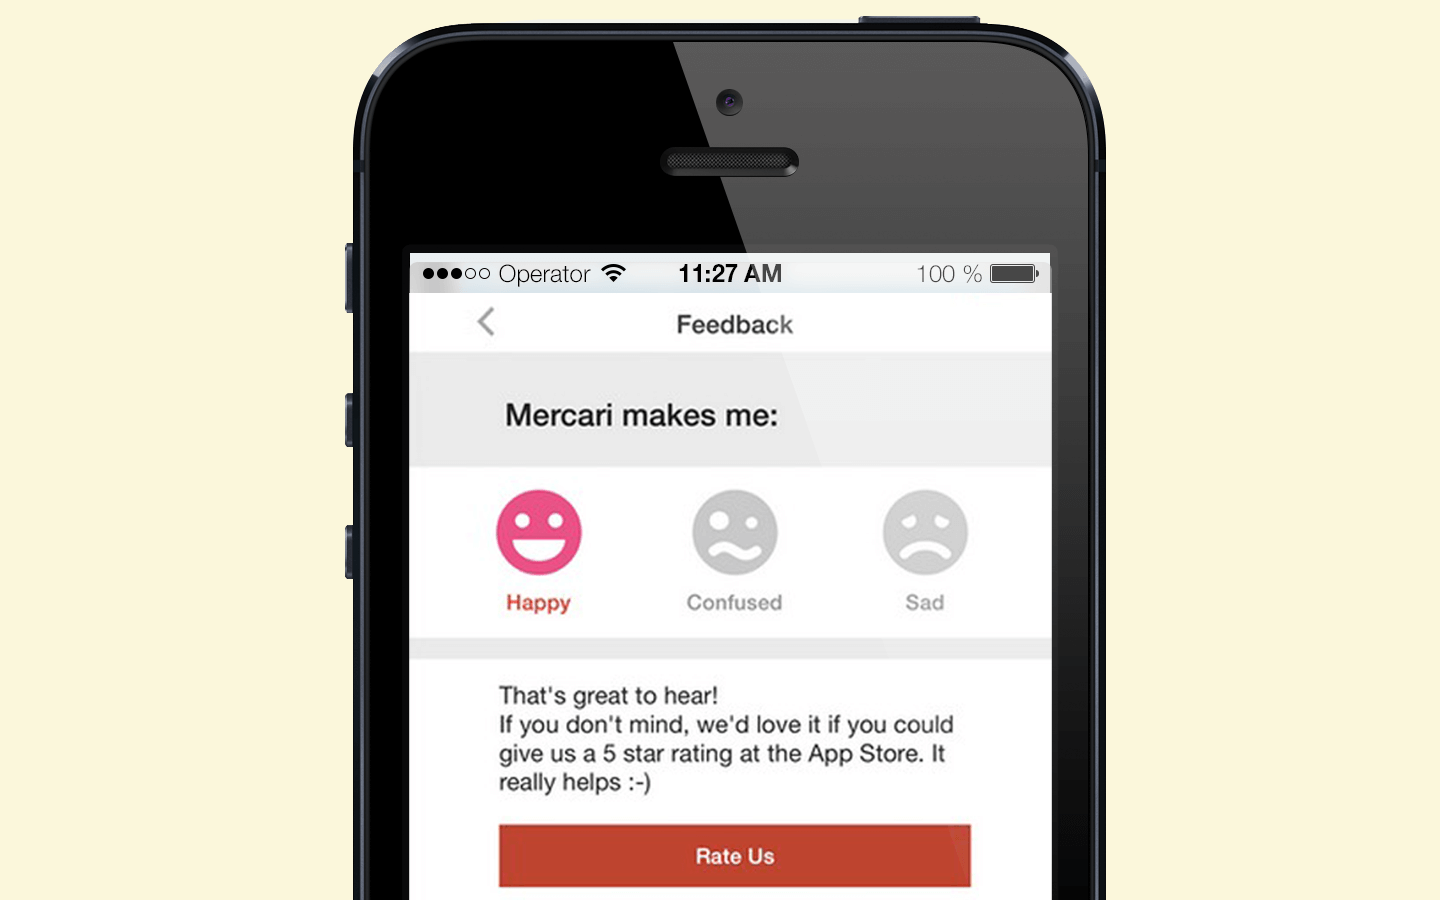 Feedback request through in-app message 